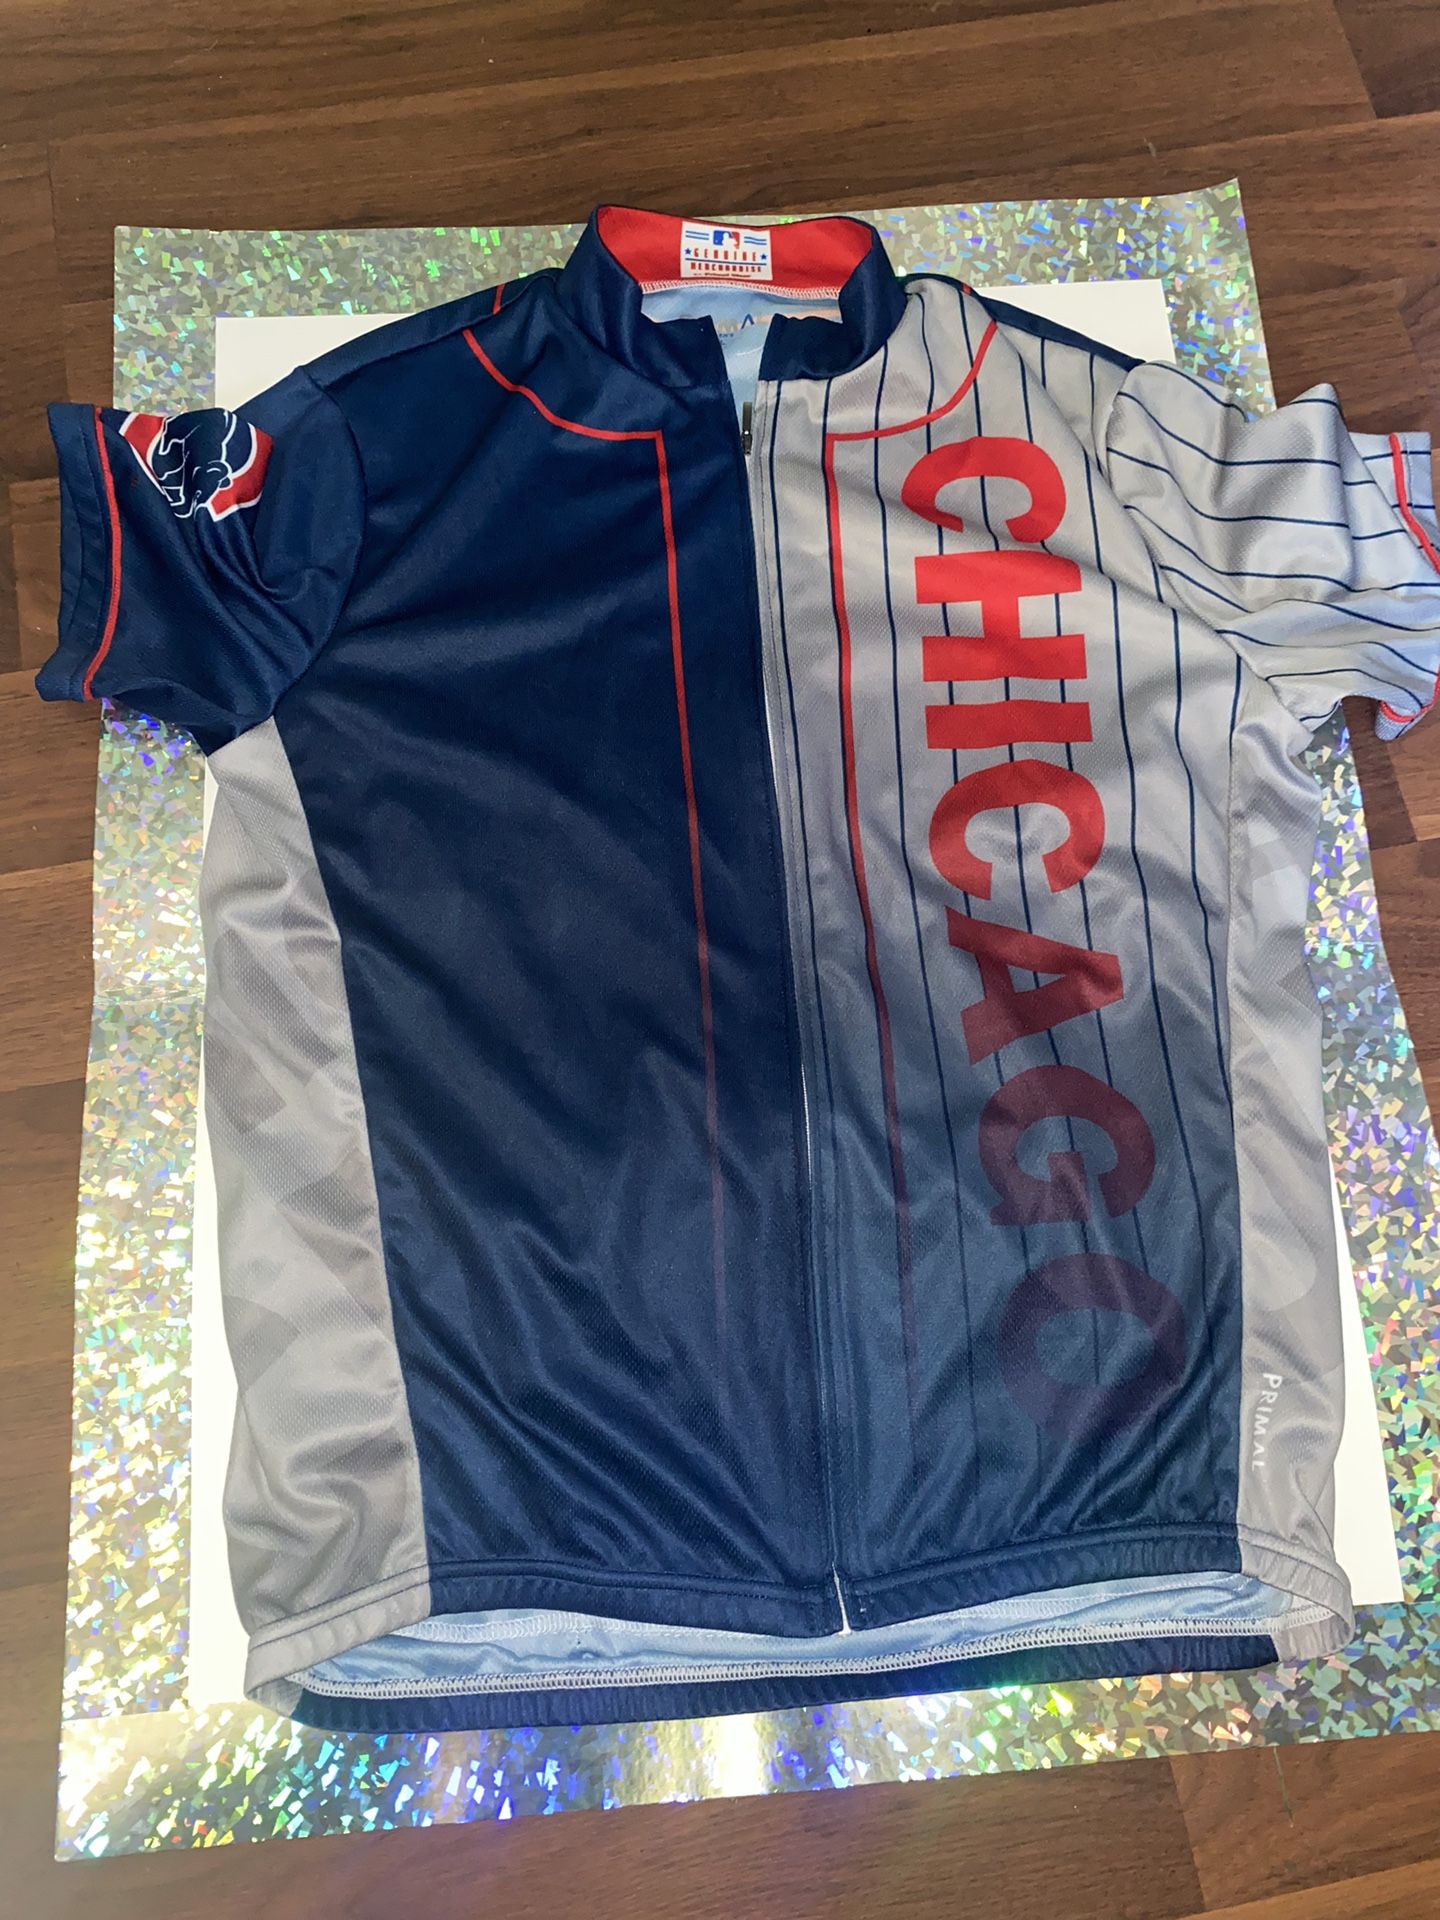 chicago cubs cycling jersey primal for Sale in Portland, OR - OfferUp